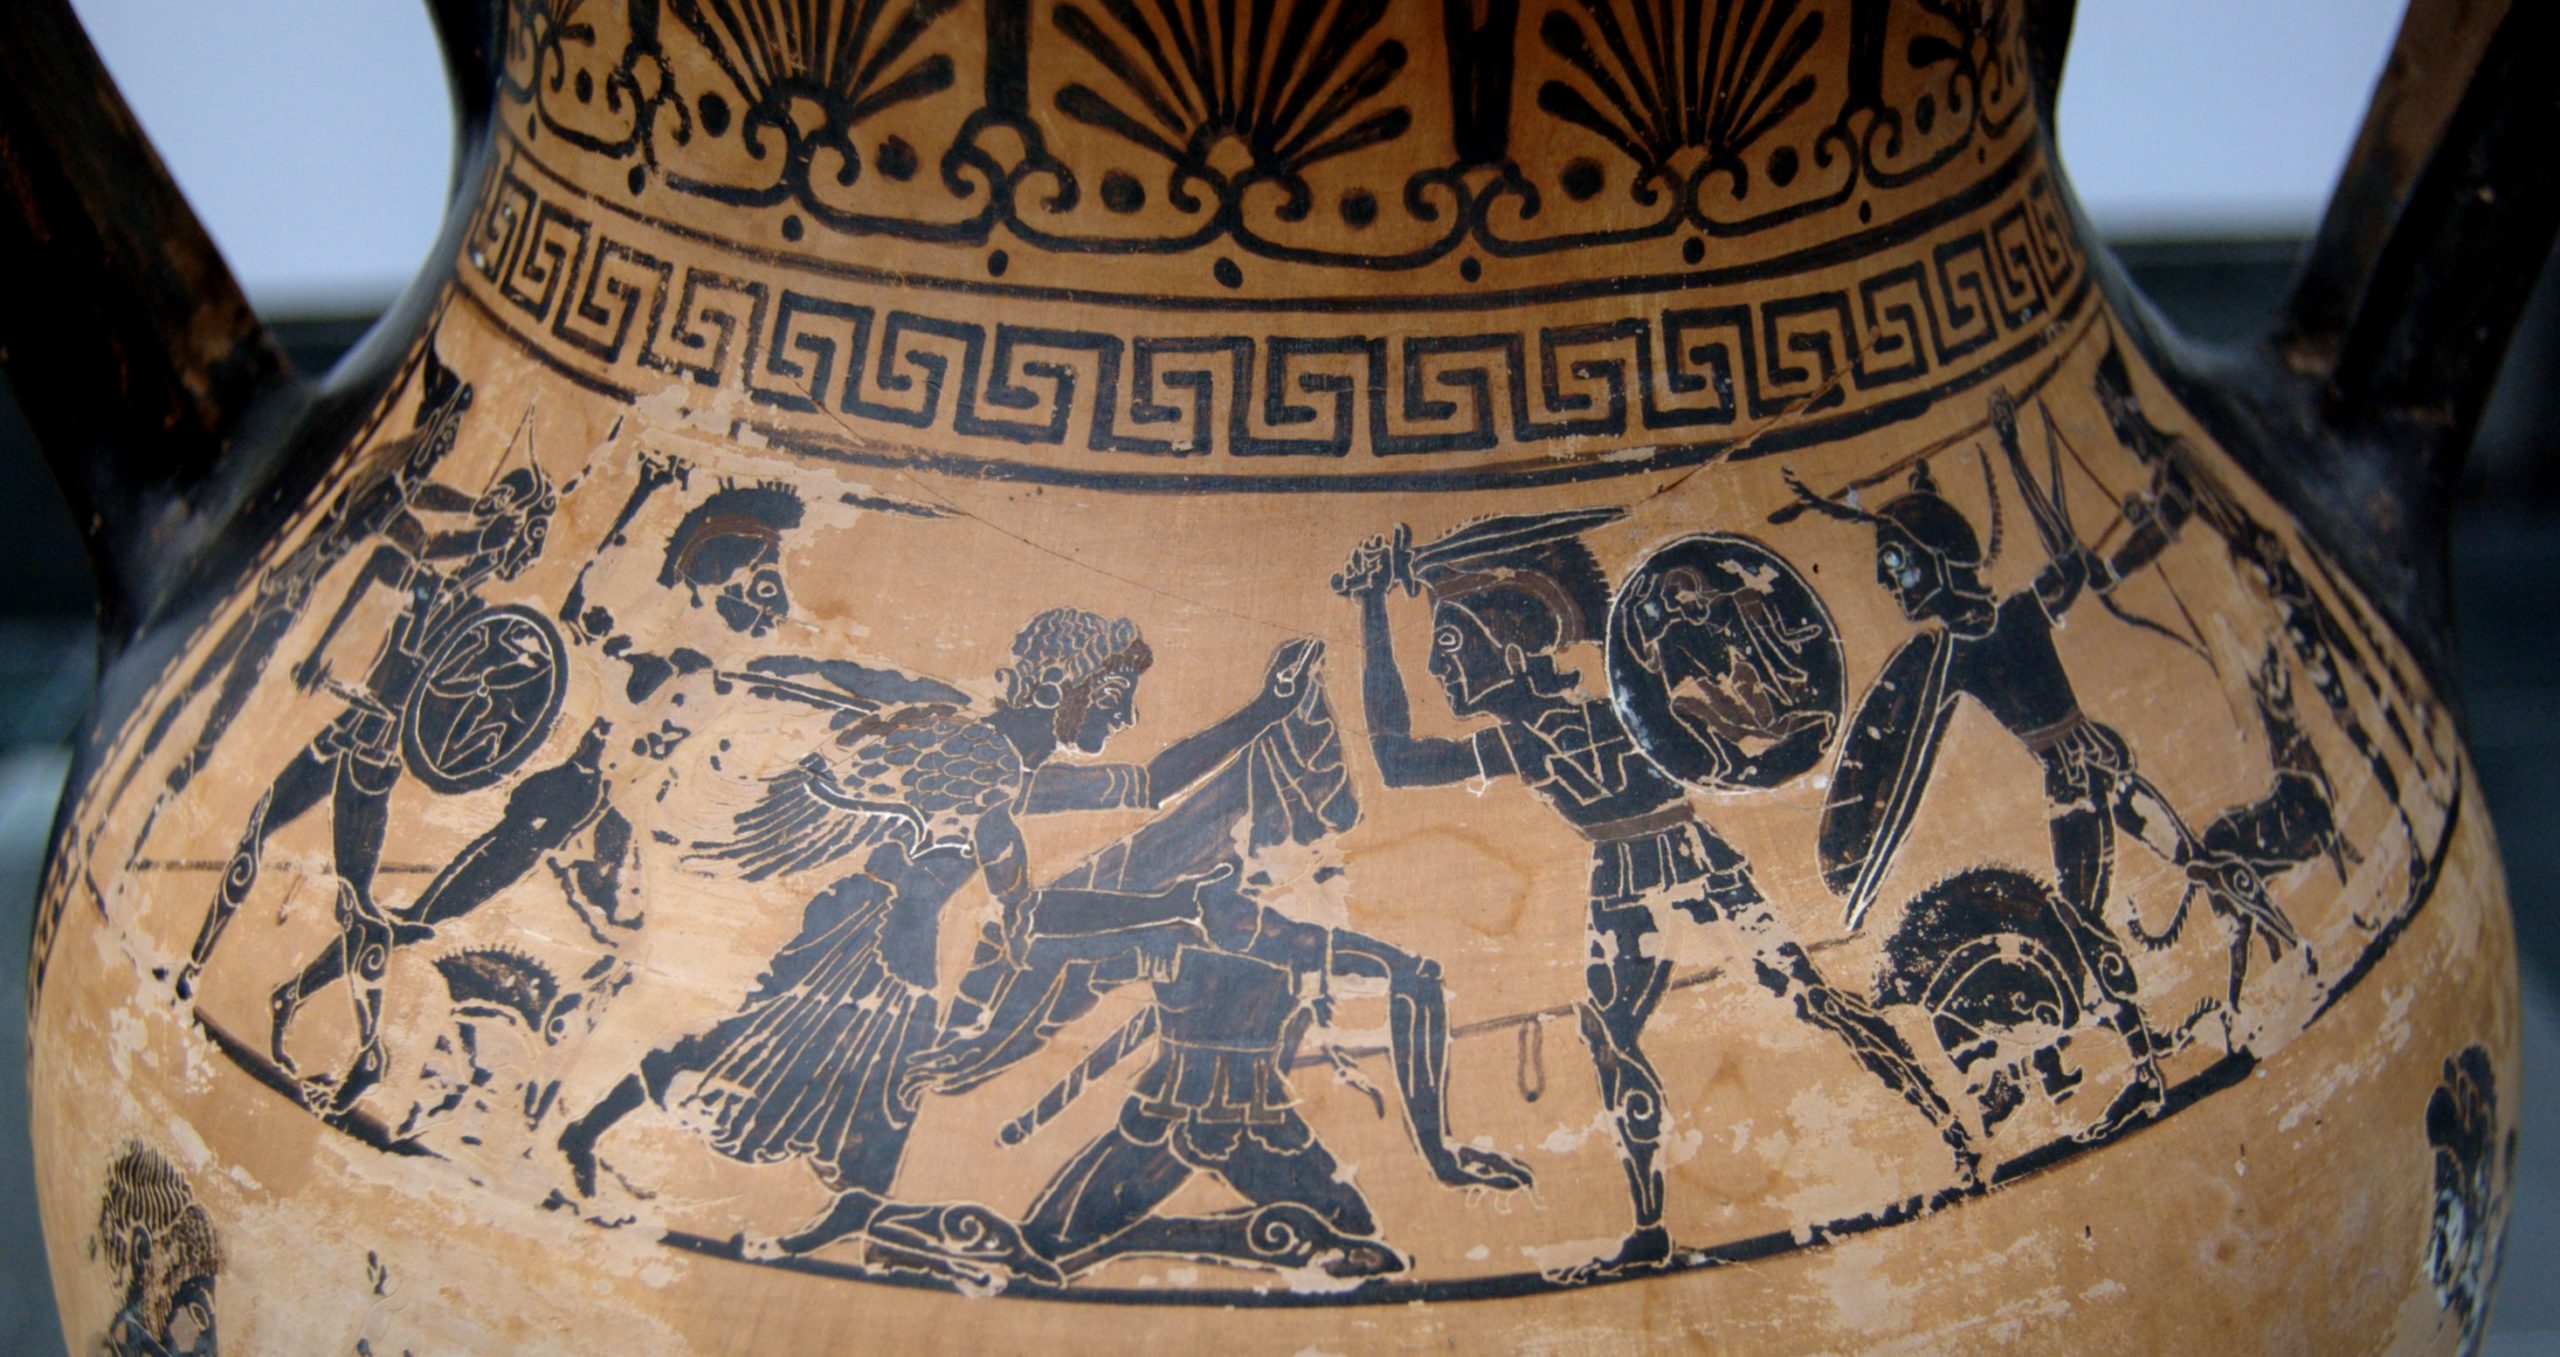 The belly of a black-figure amphora depicting Aphrodite at Aeneas' side as warriors with swords and shields press in from either side.